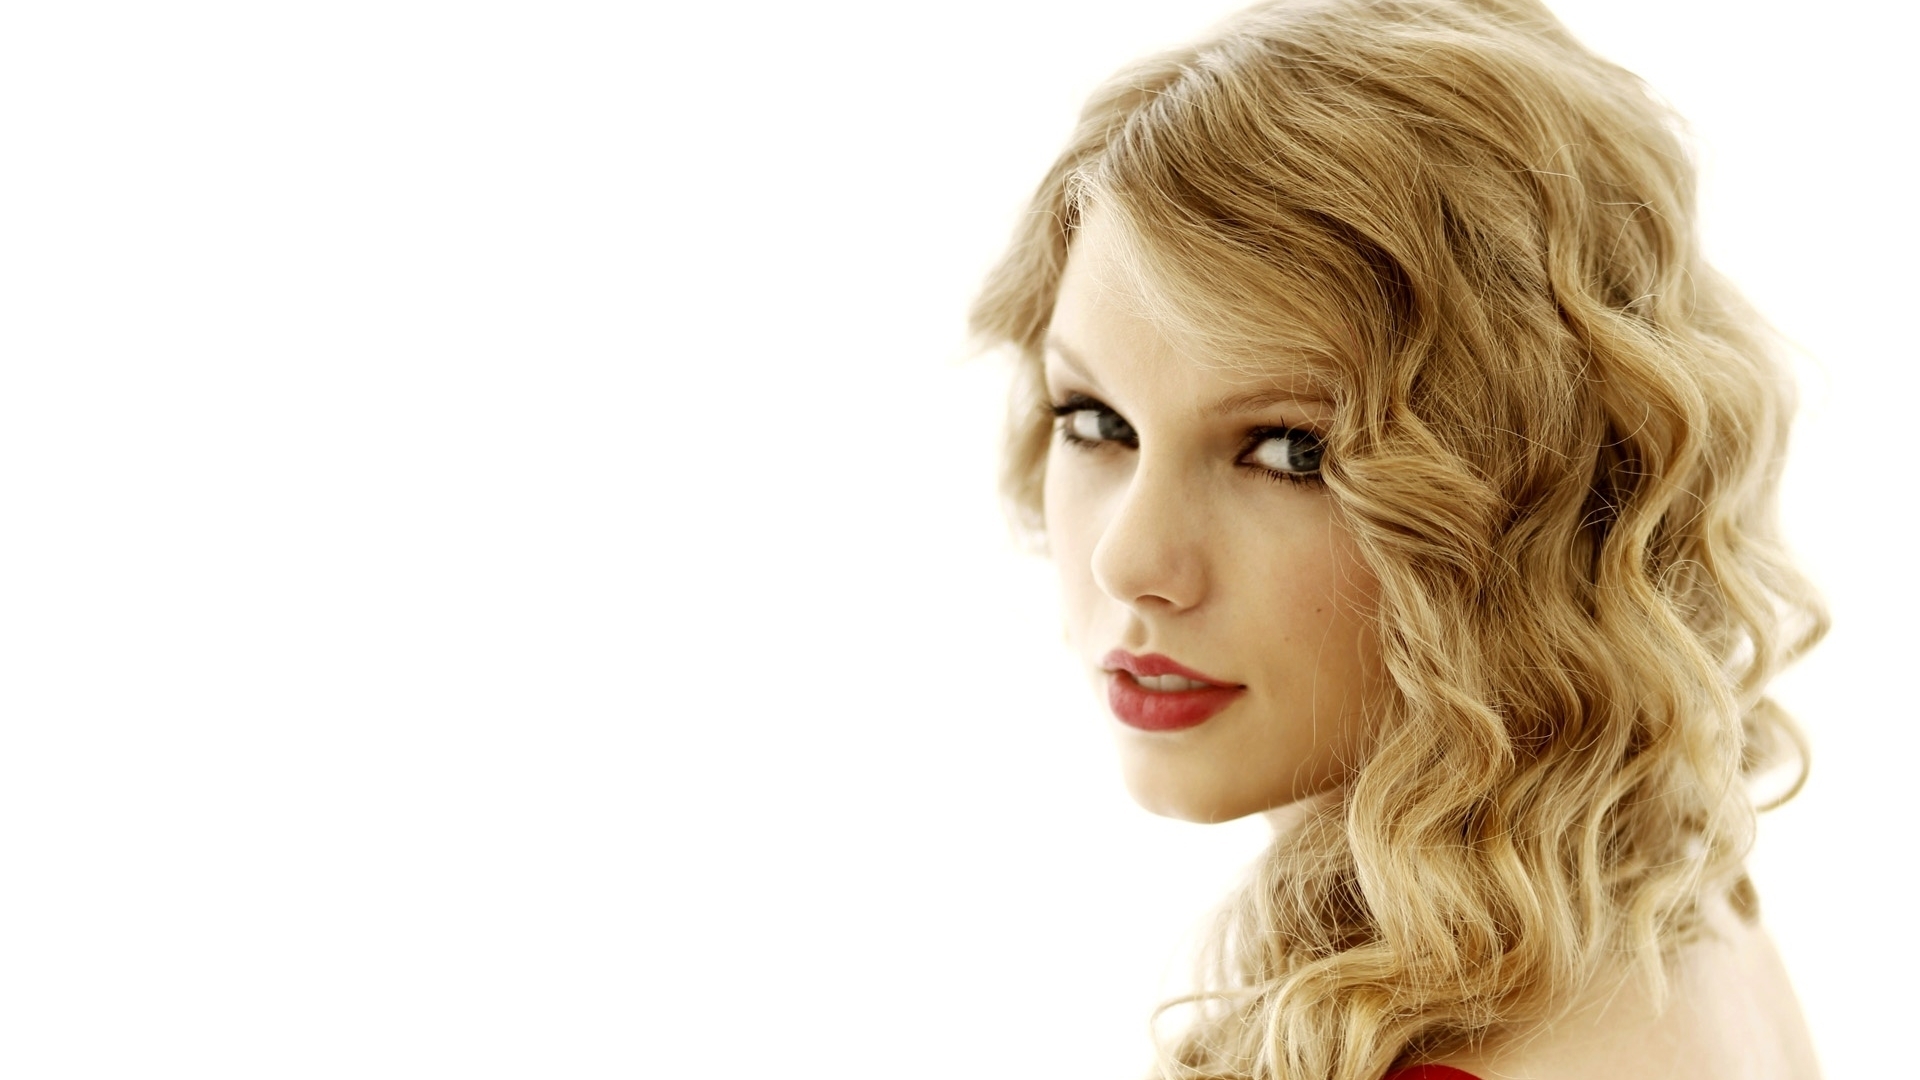 Taylor Swift Image HD Wallpaper And